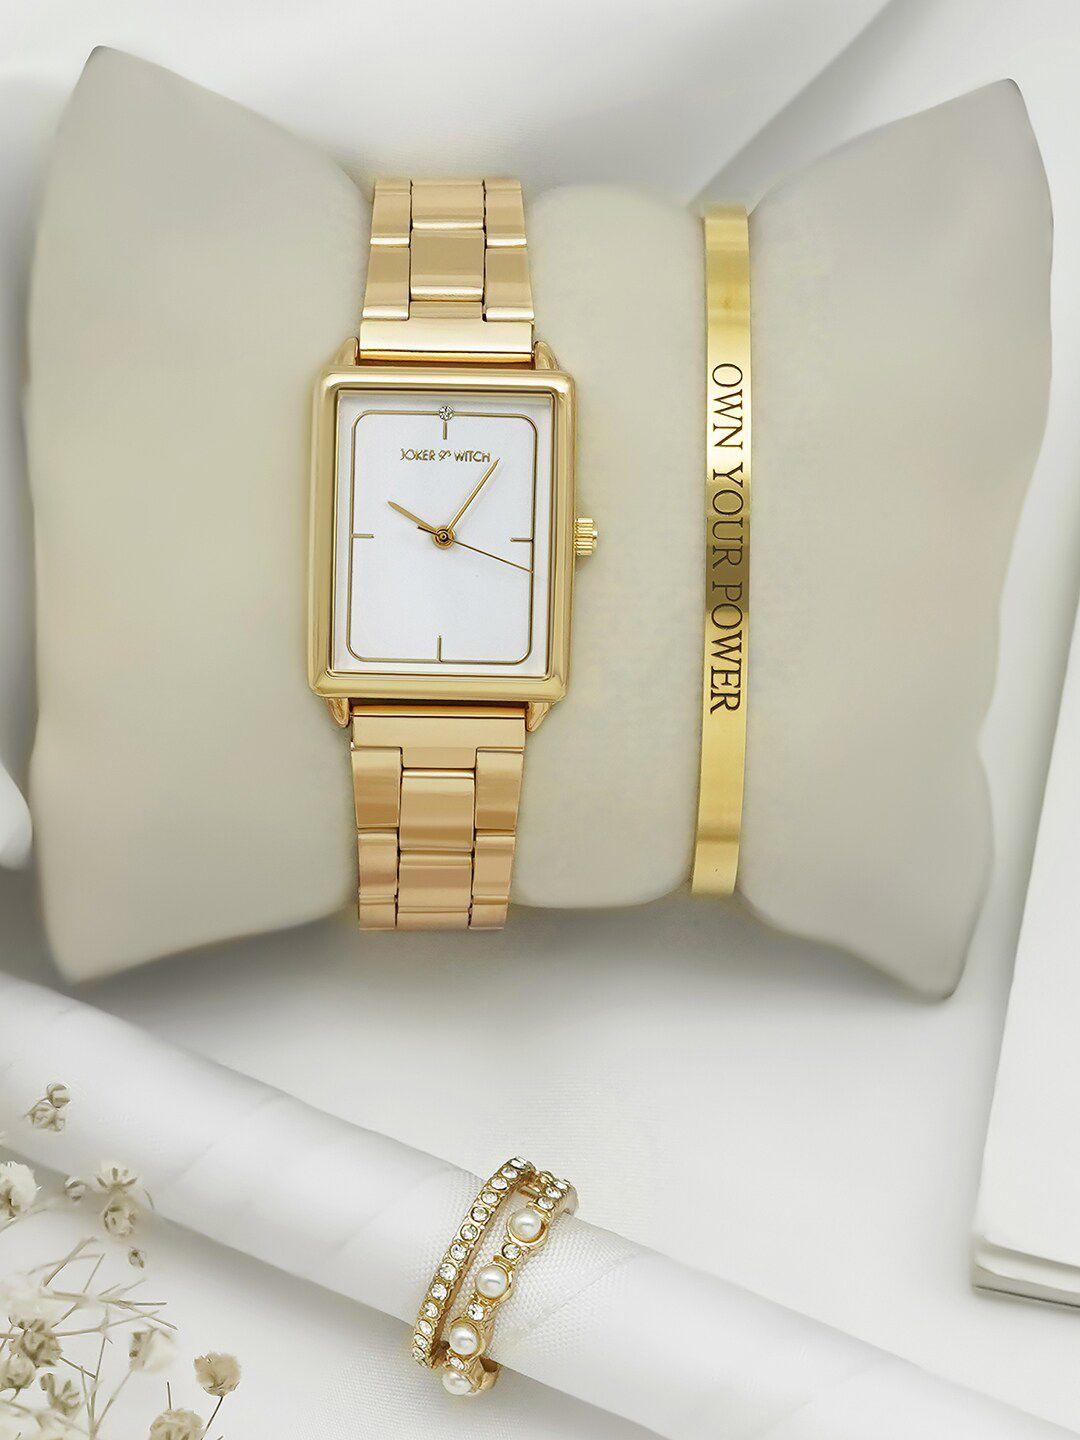 JOKER & WITCH Women White Dial & Gold Toned Stainless Steel Bracelet Style Straps Analogue Watch